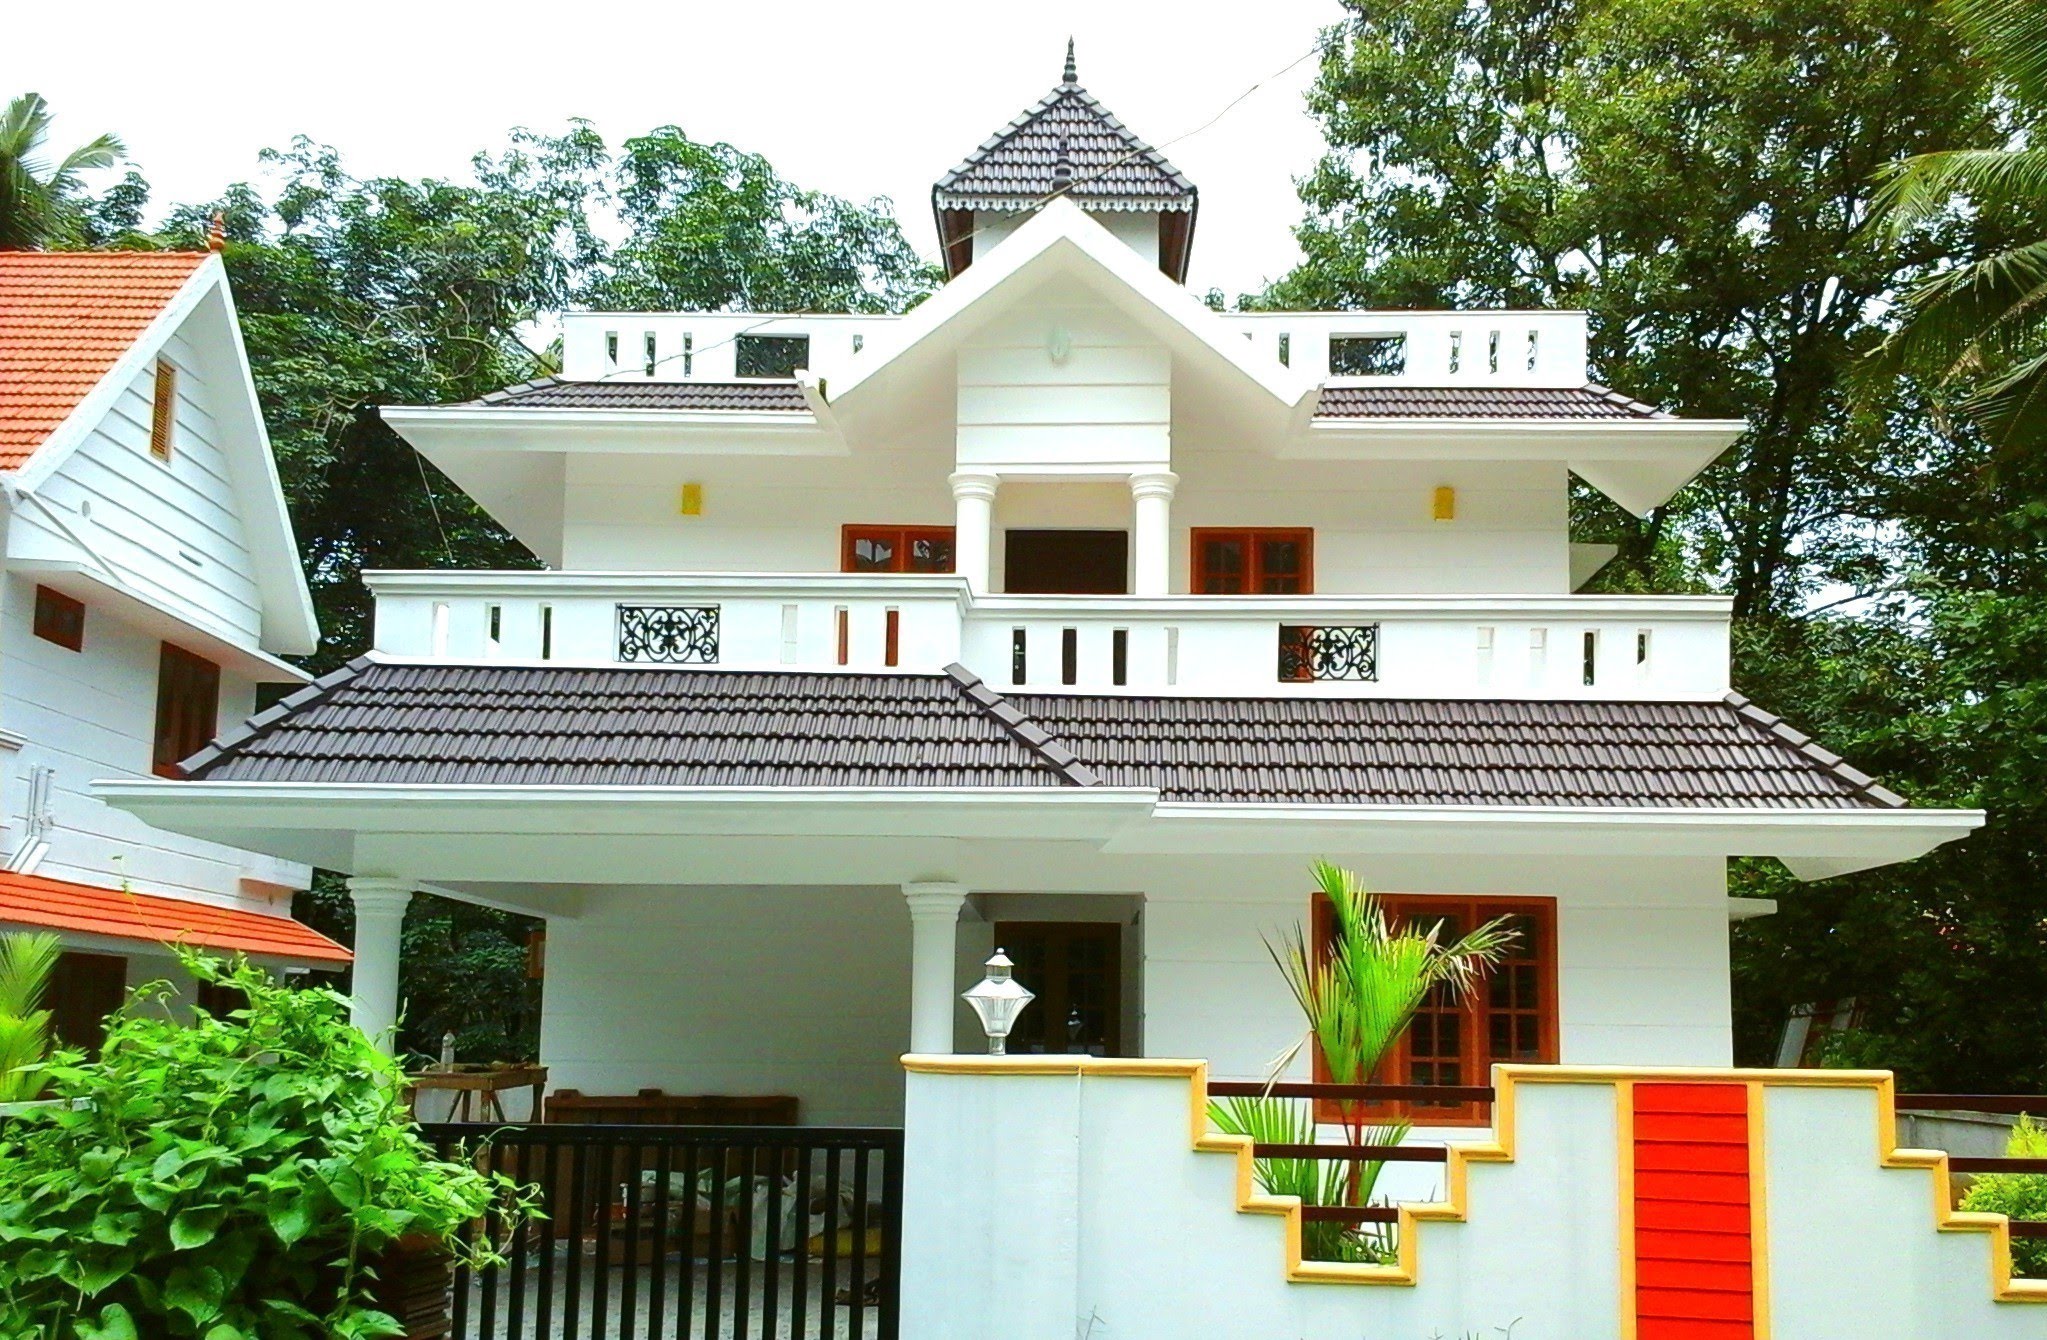 Understanding a Traditional Kerala Styled House Design - Happho